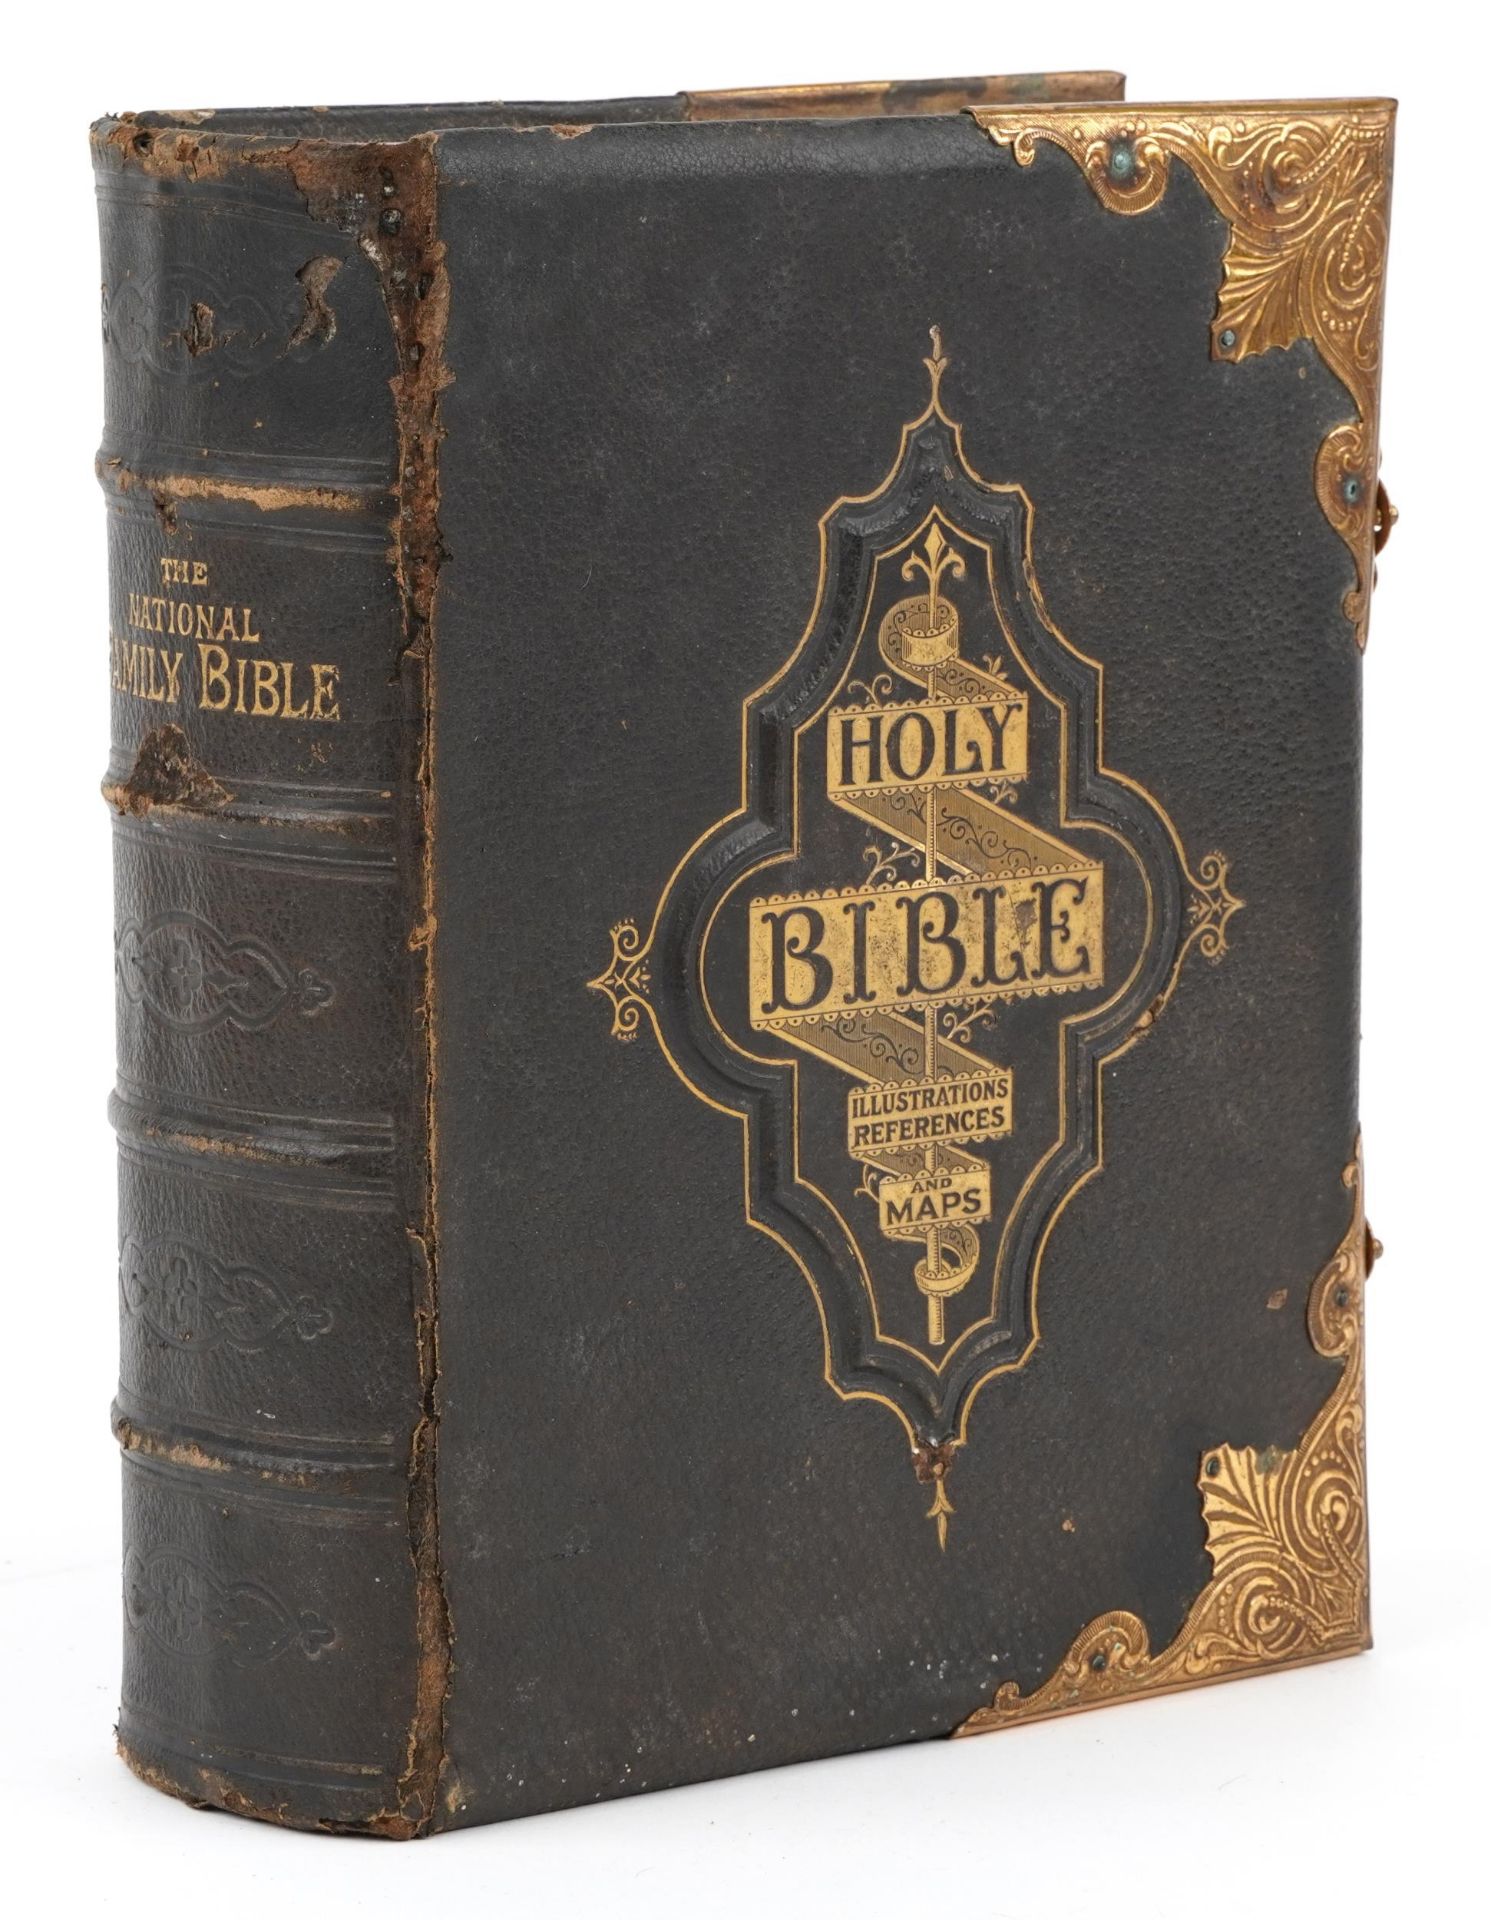 Large metal bound leather family holy bible with coloured plates and maps : For further